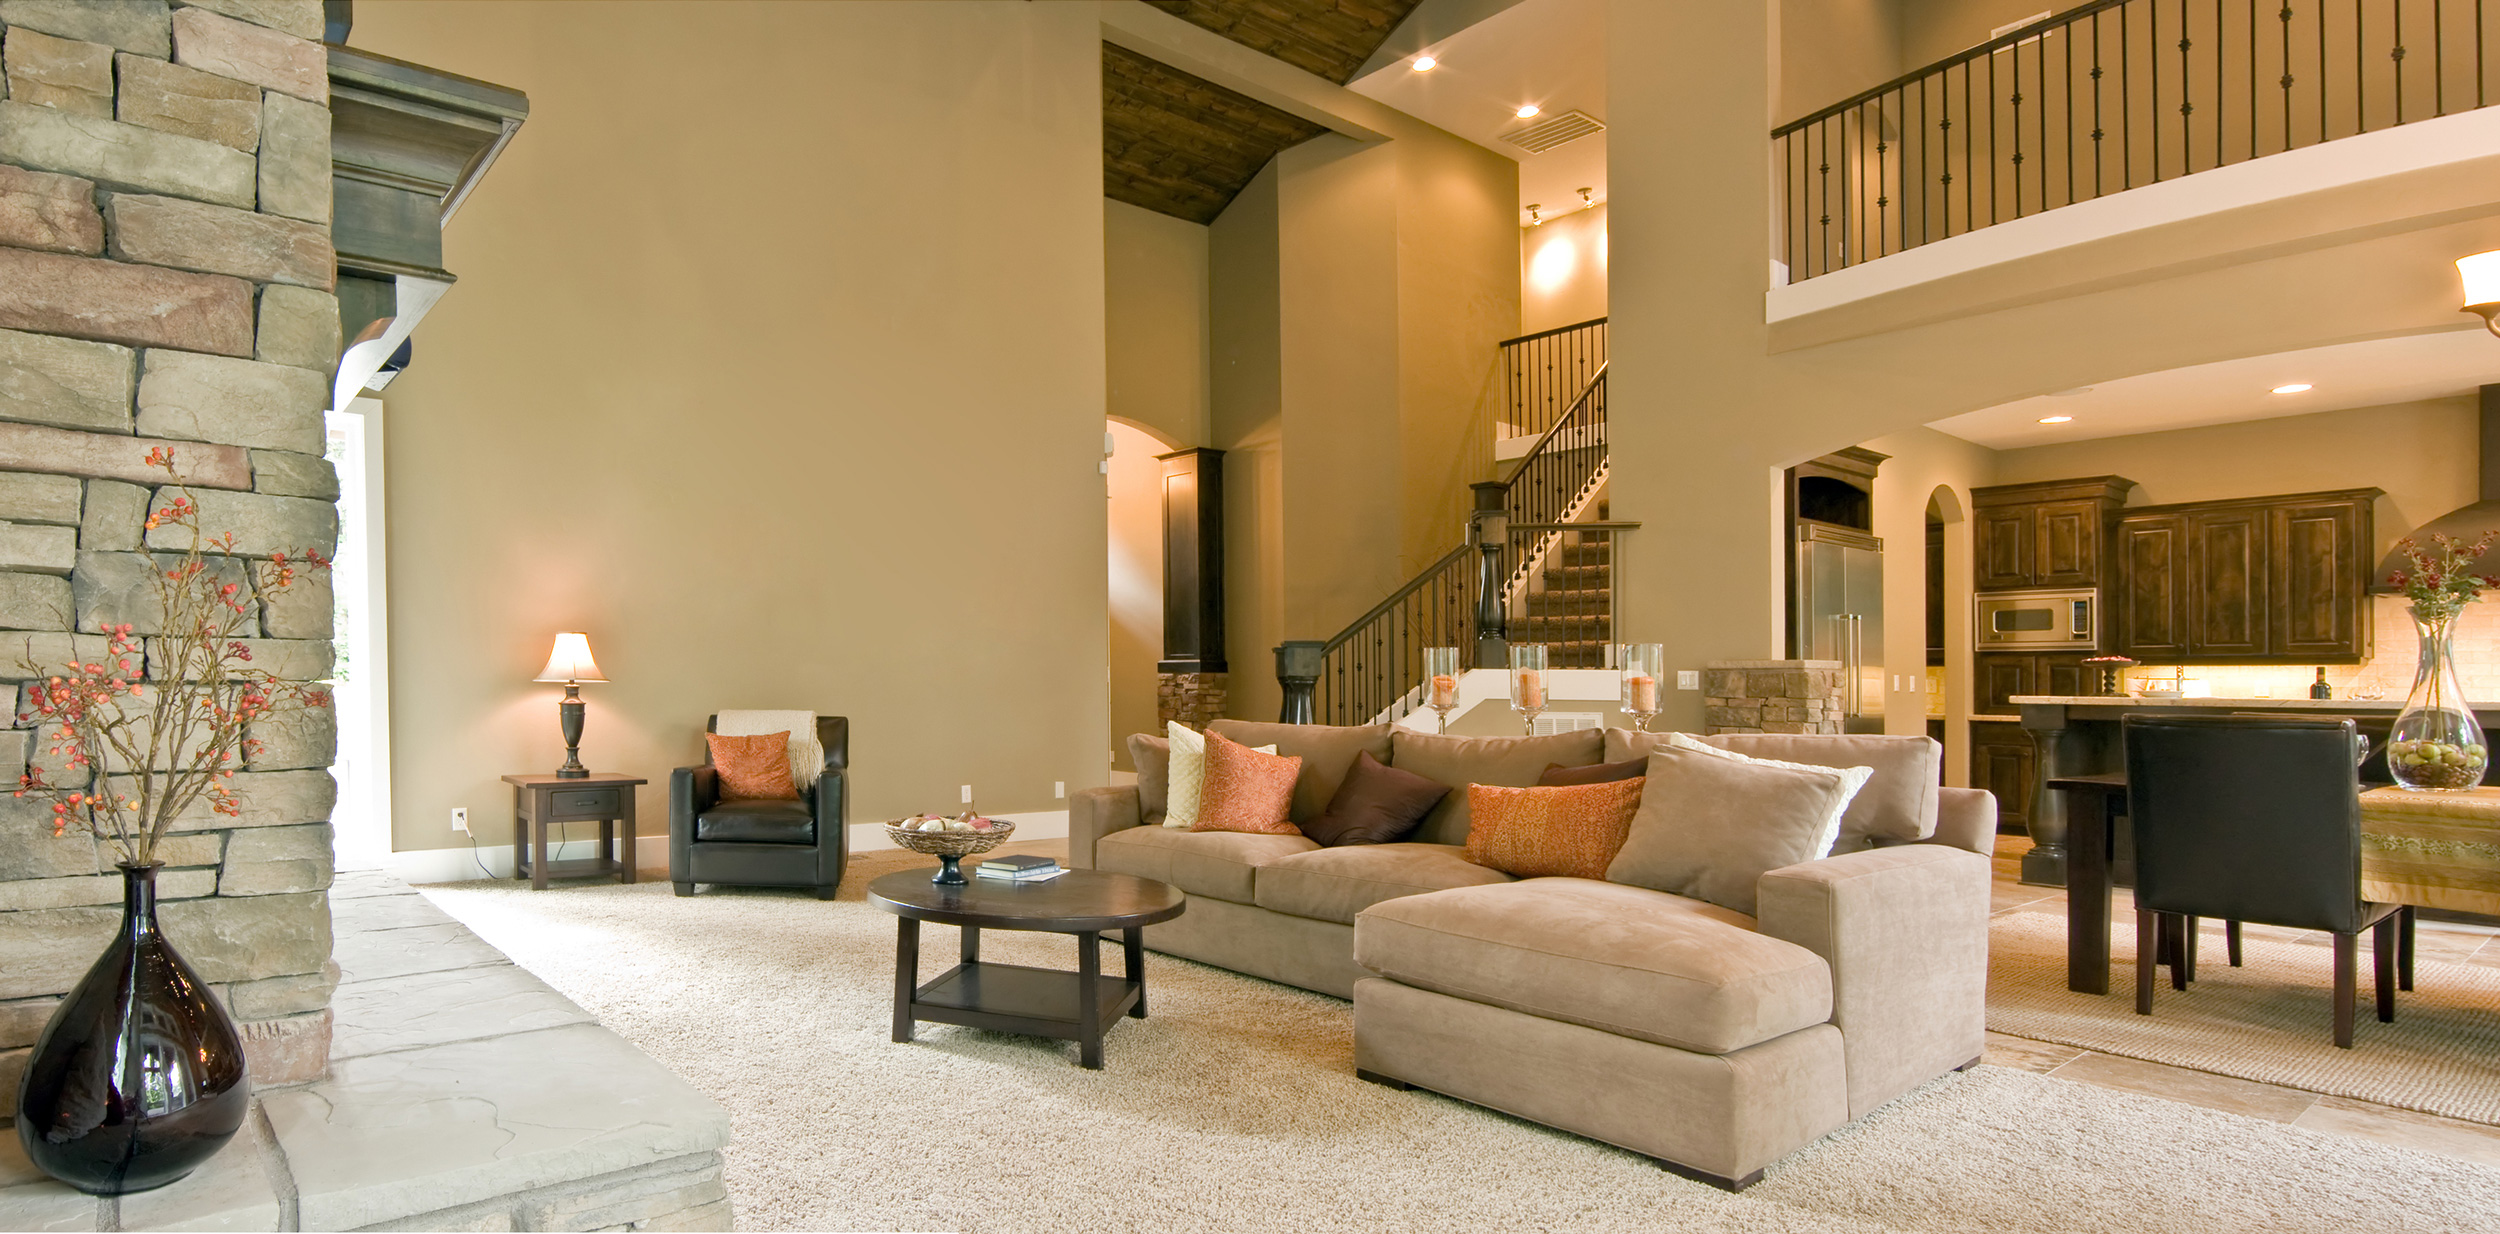 Living Room Panorama in Luxury Home